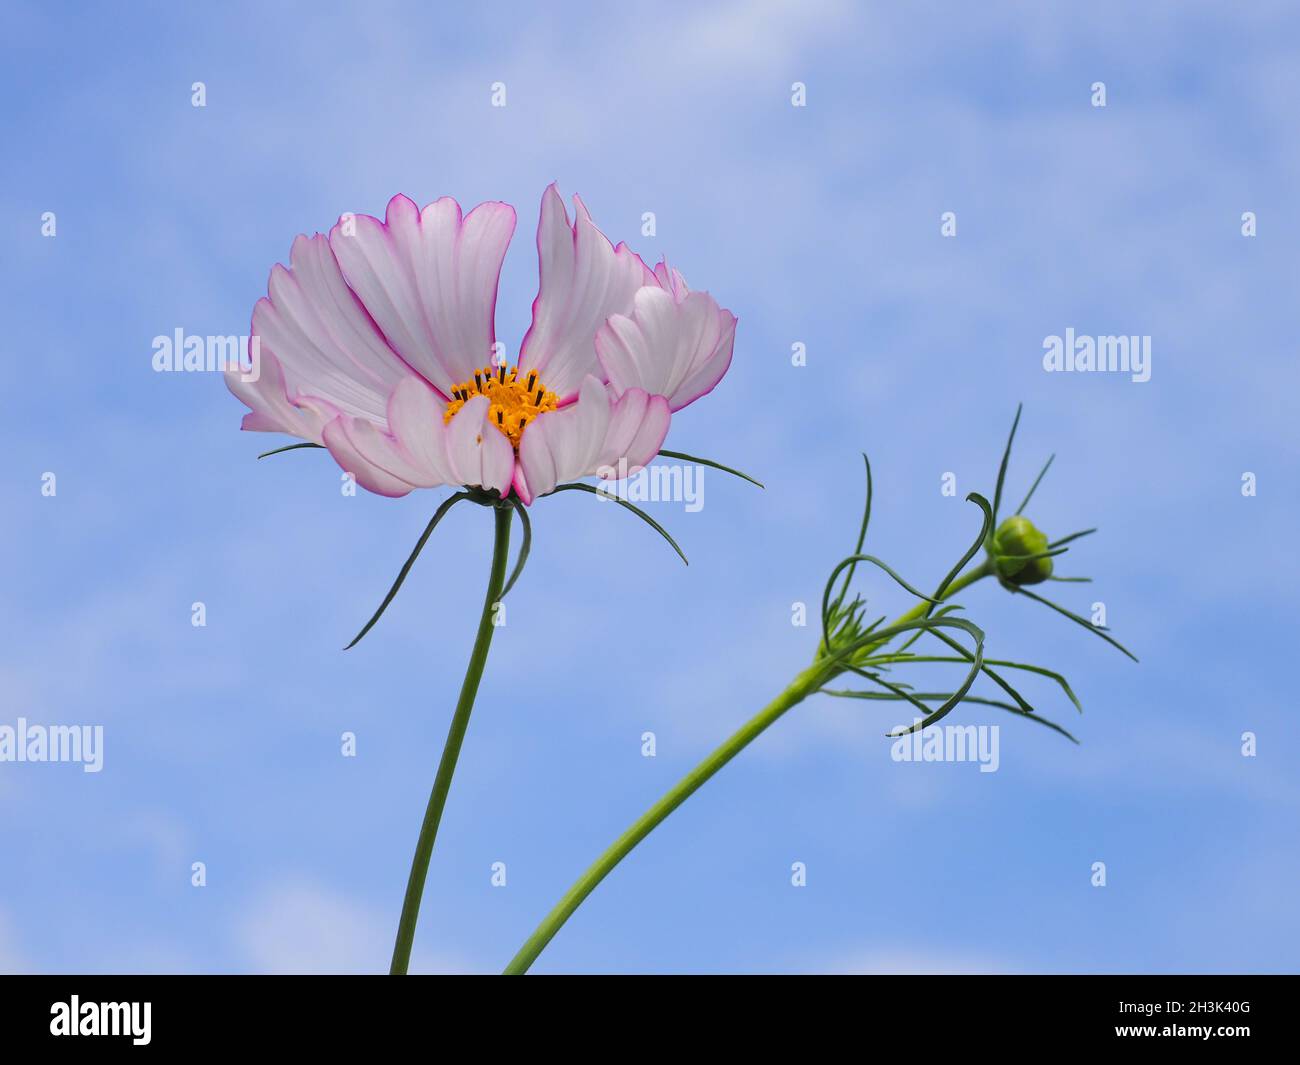 White with pink edges Cosmea blossom or Mexican aster flower in the blue sky background. Cosmos bipinnatus is flowering plant of the family Asteraceae Stock Photo